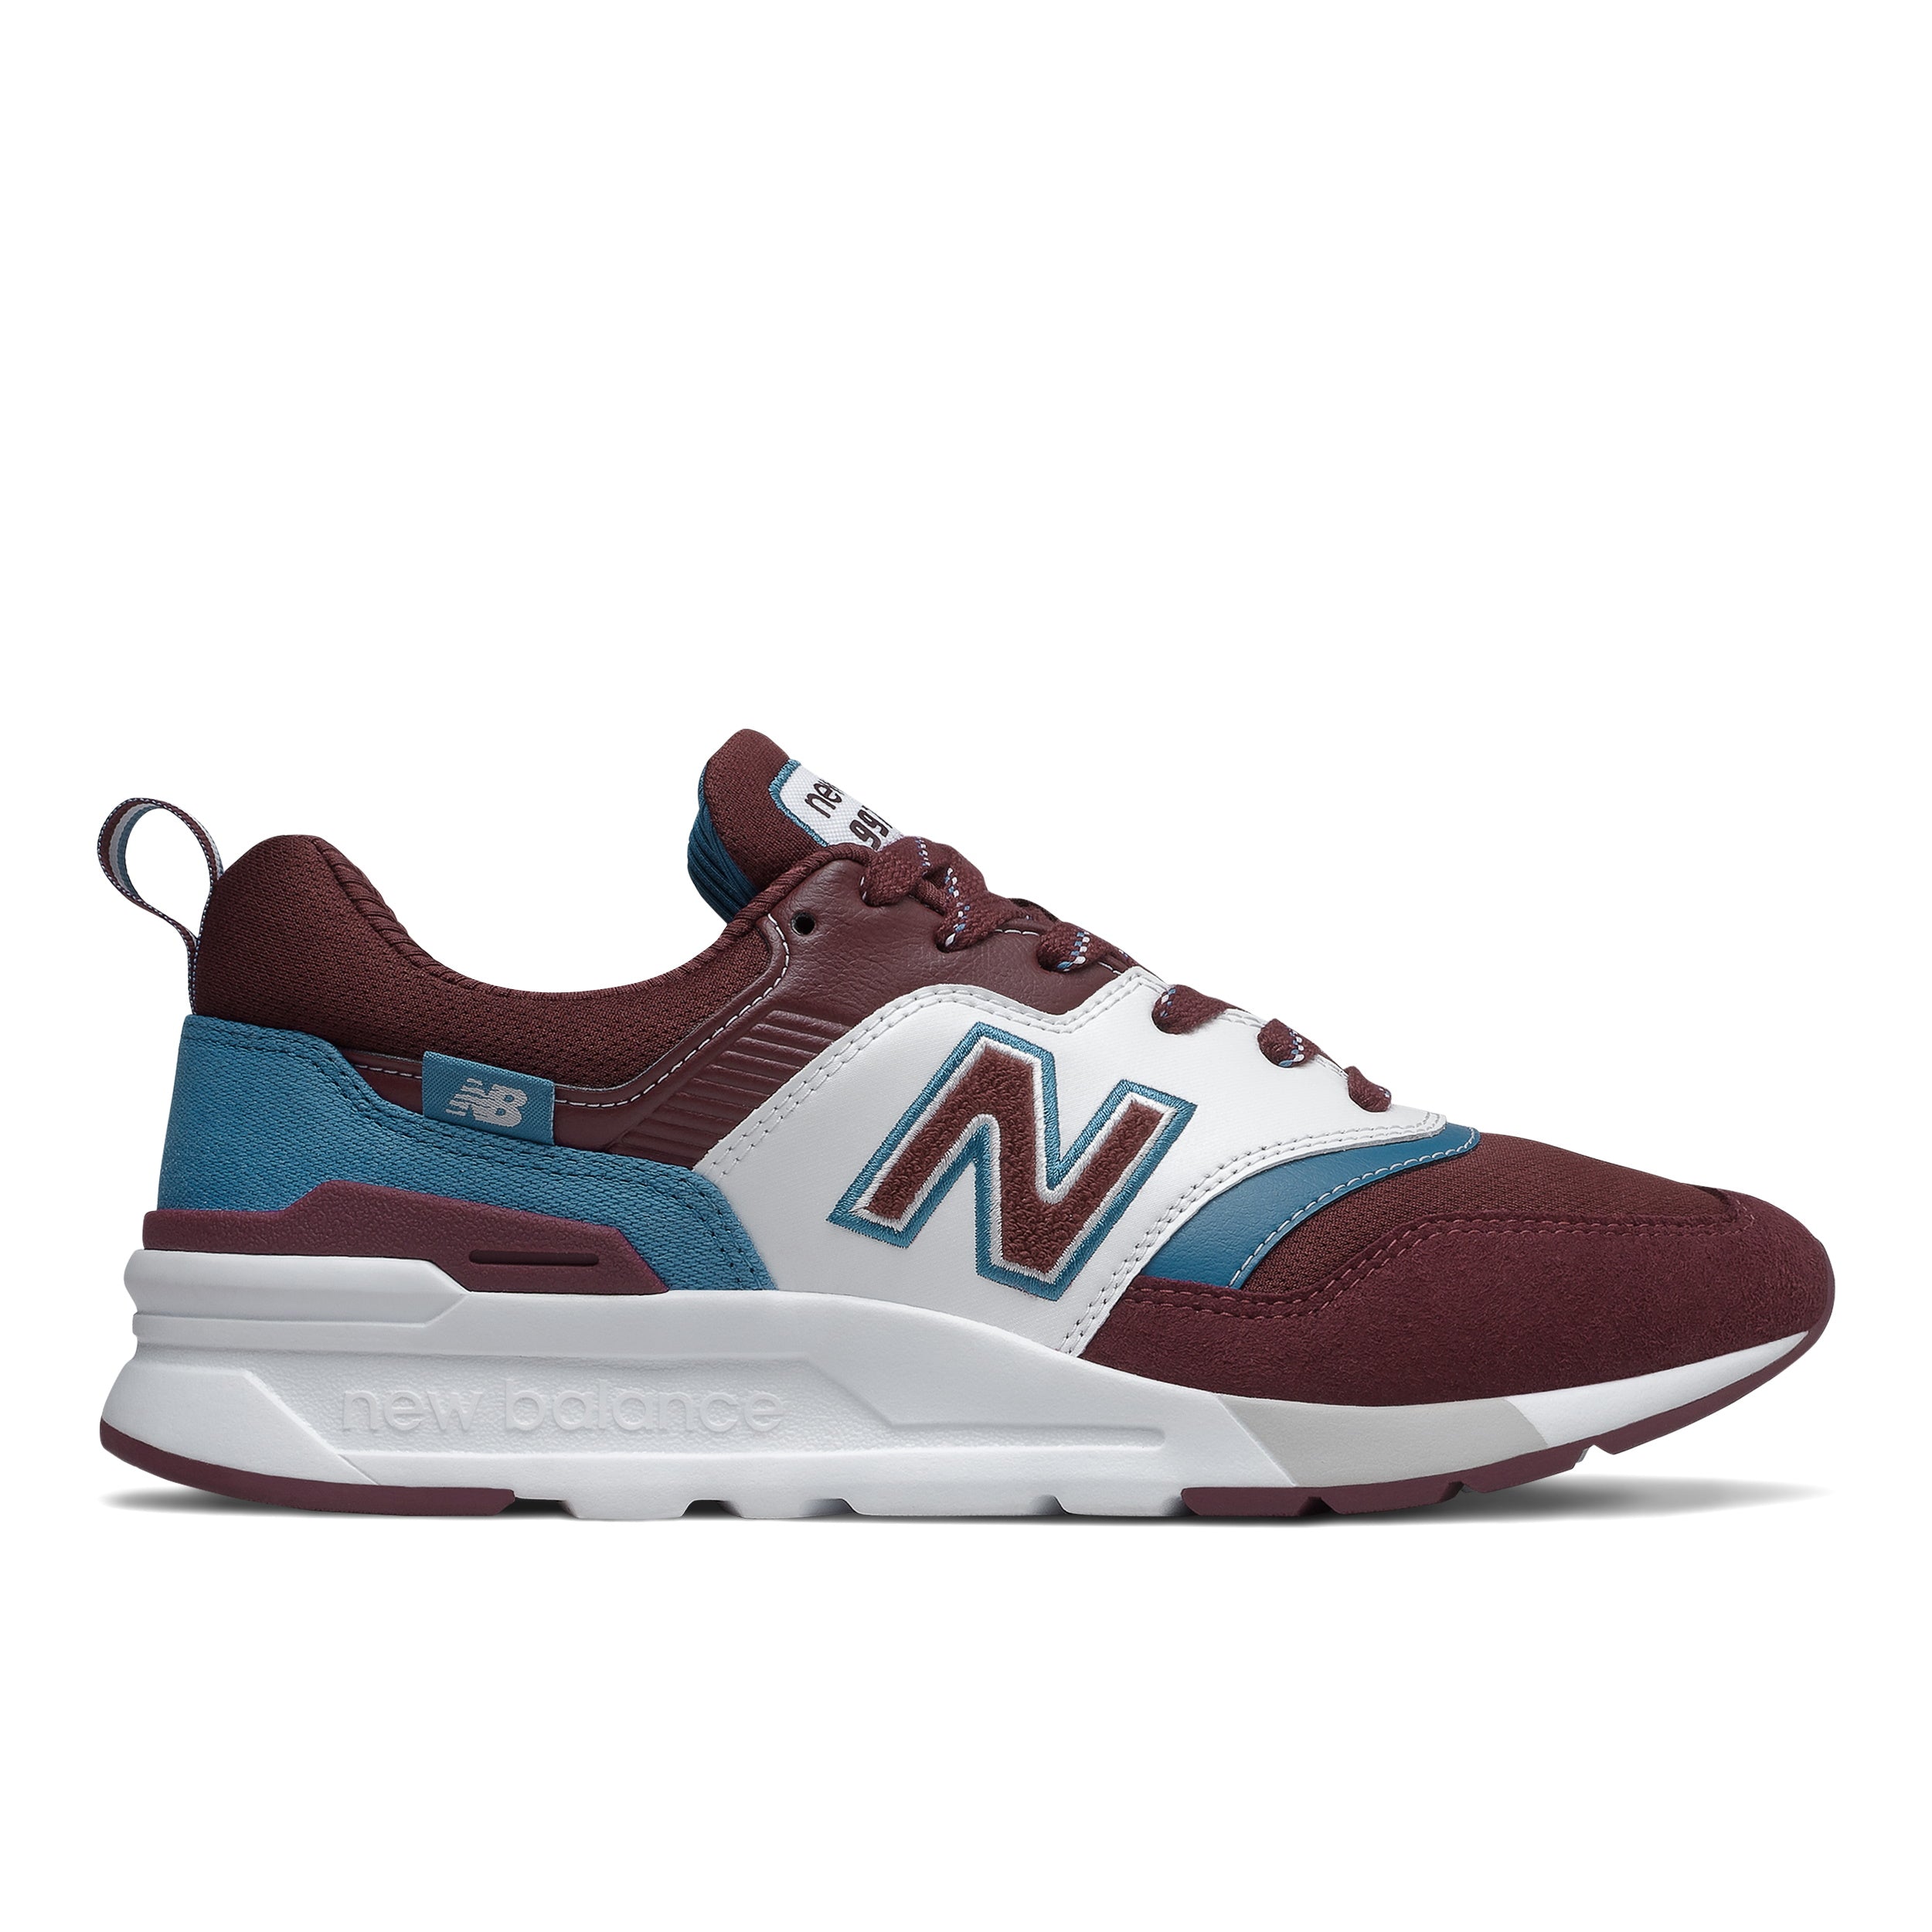 troon nederlaag viel Buy New Balance 997 Burgundy Tennis Shoes at In Style – InStyle-Tuscaloosa